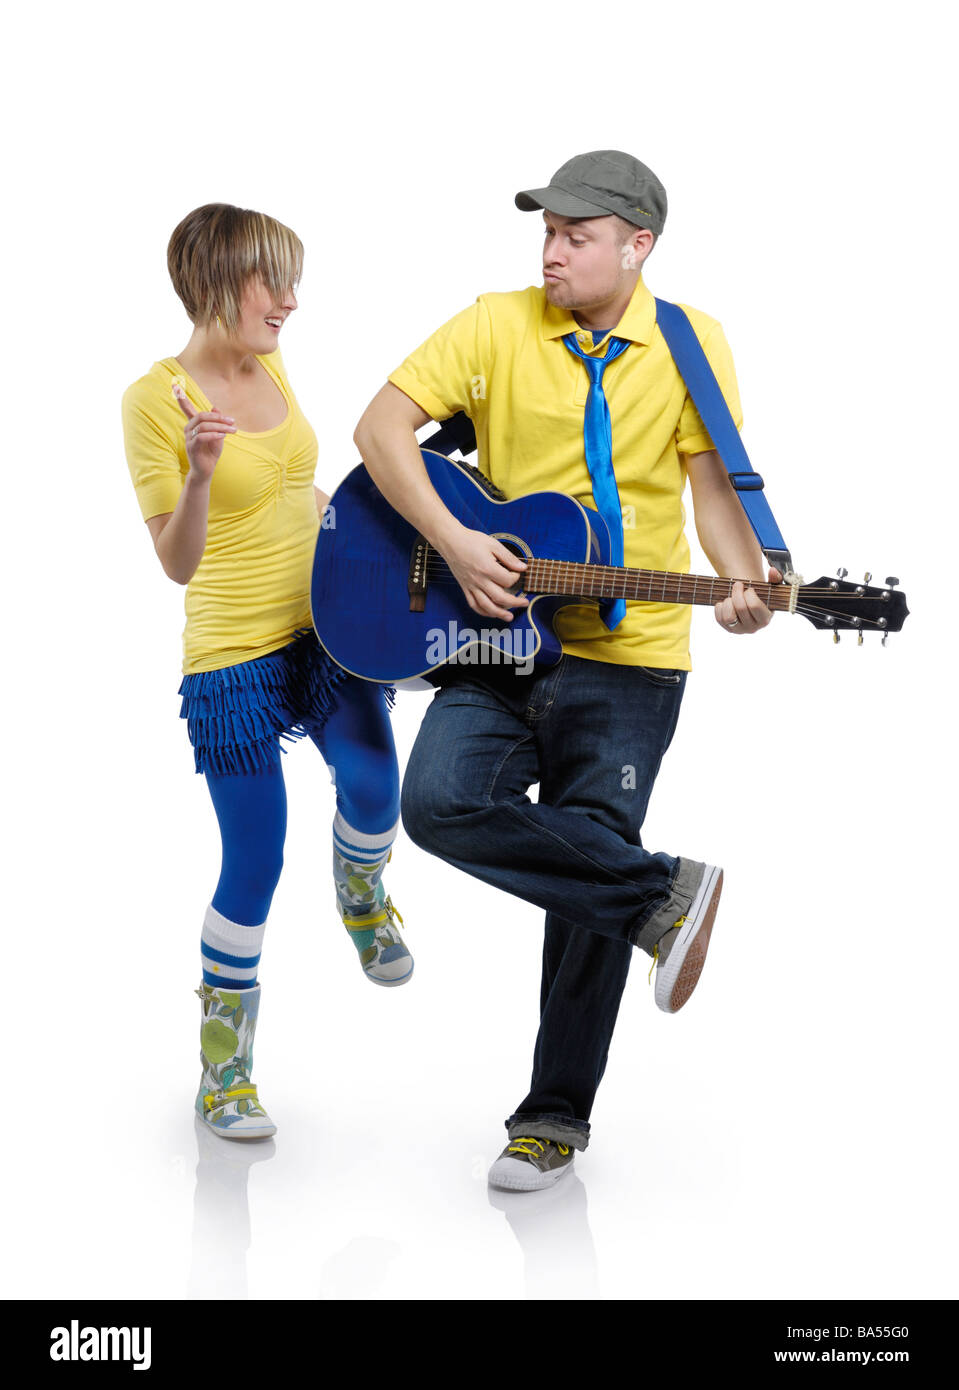 Man playing the guitar and a woman dancing Stock Photo